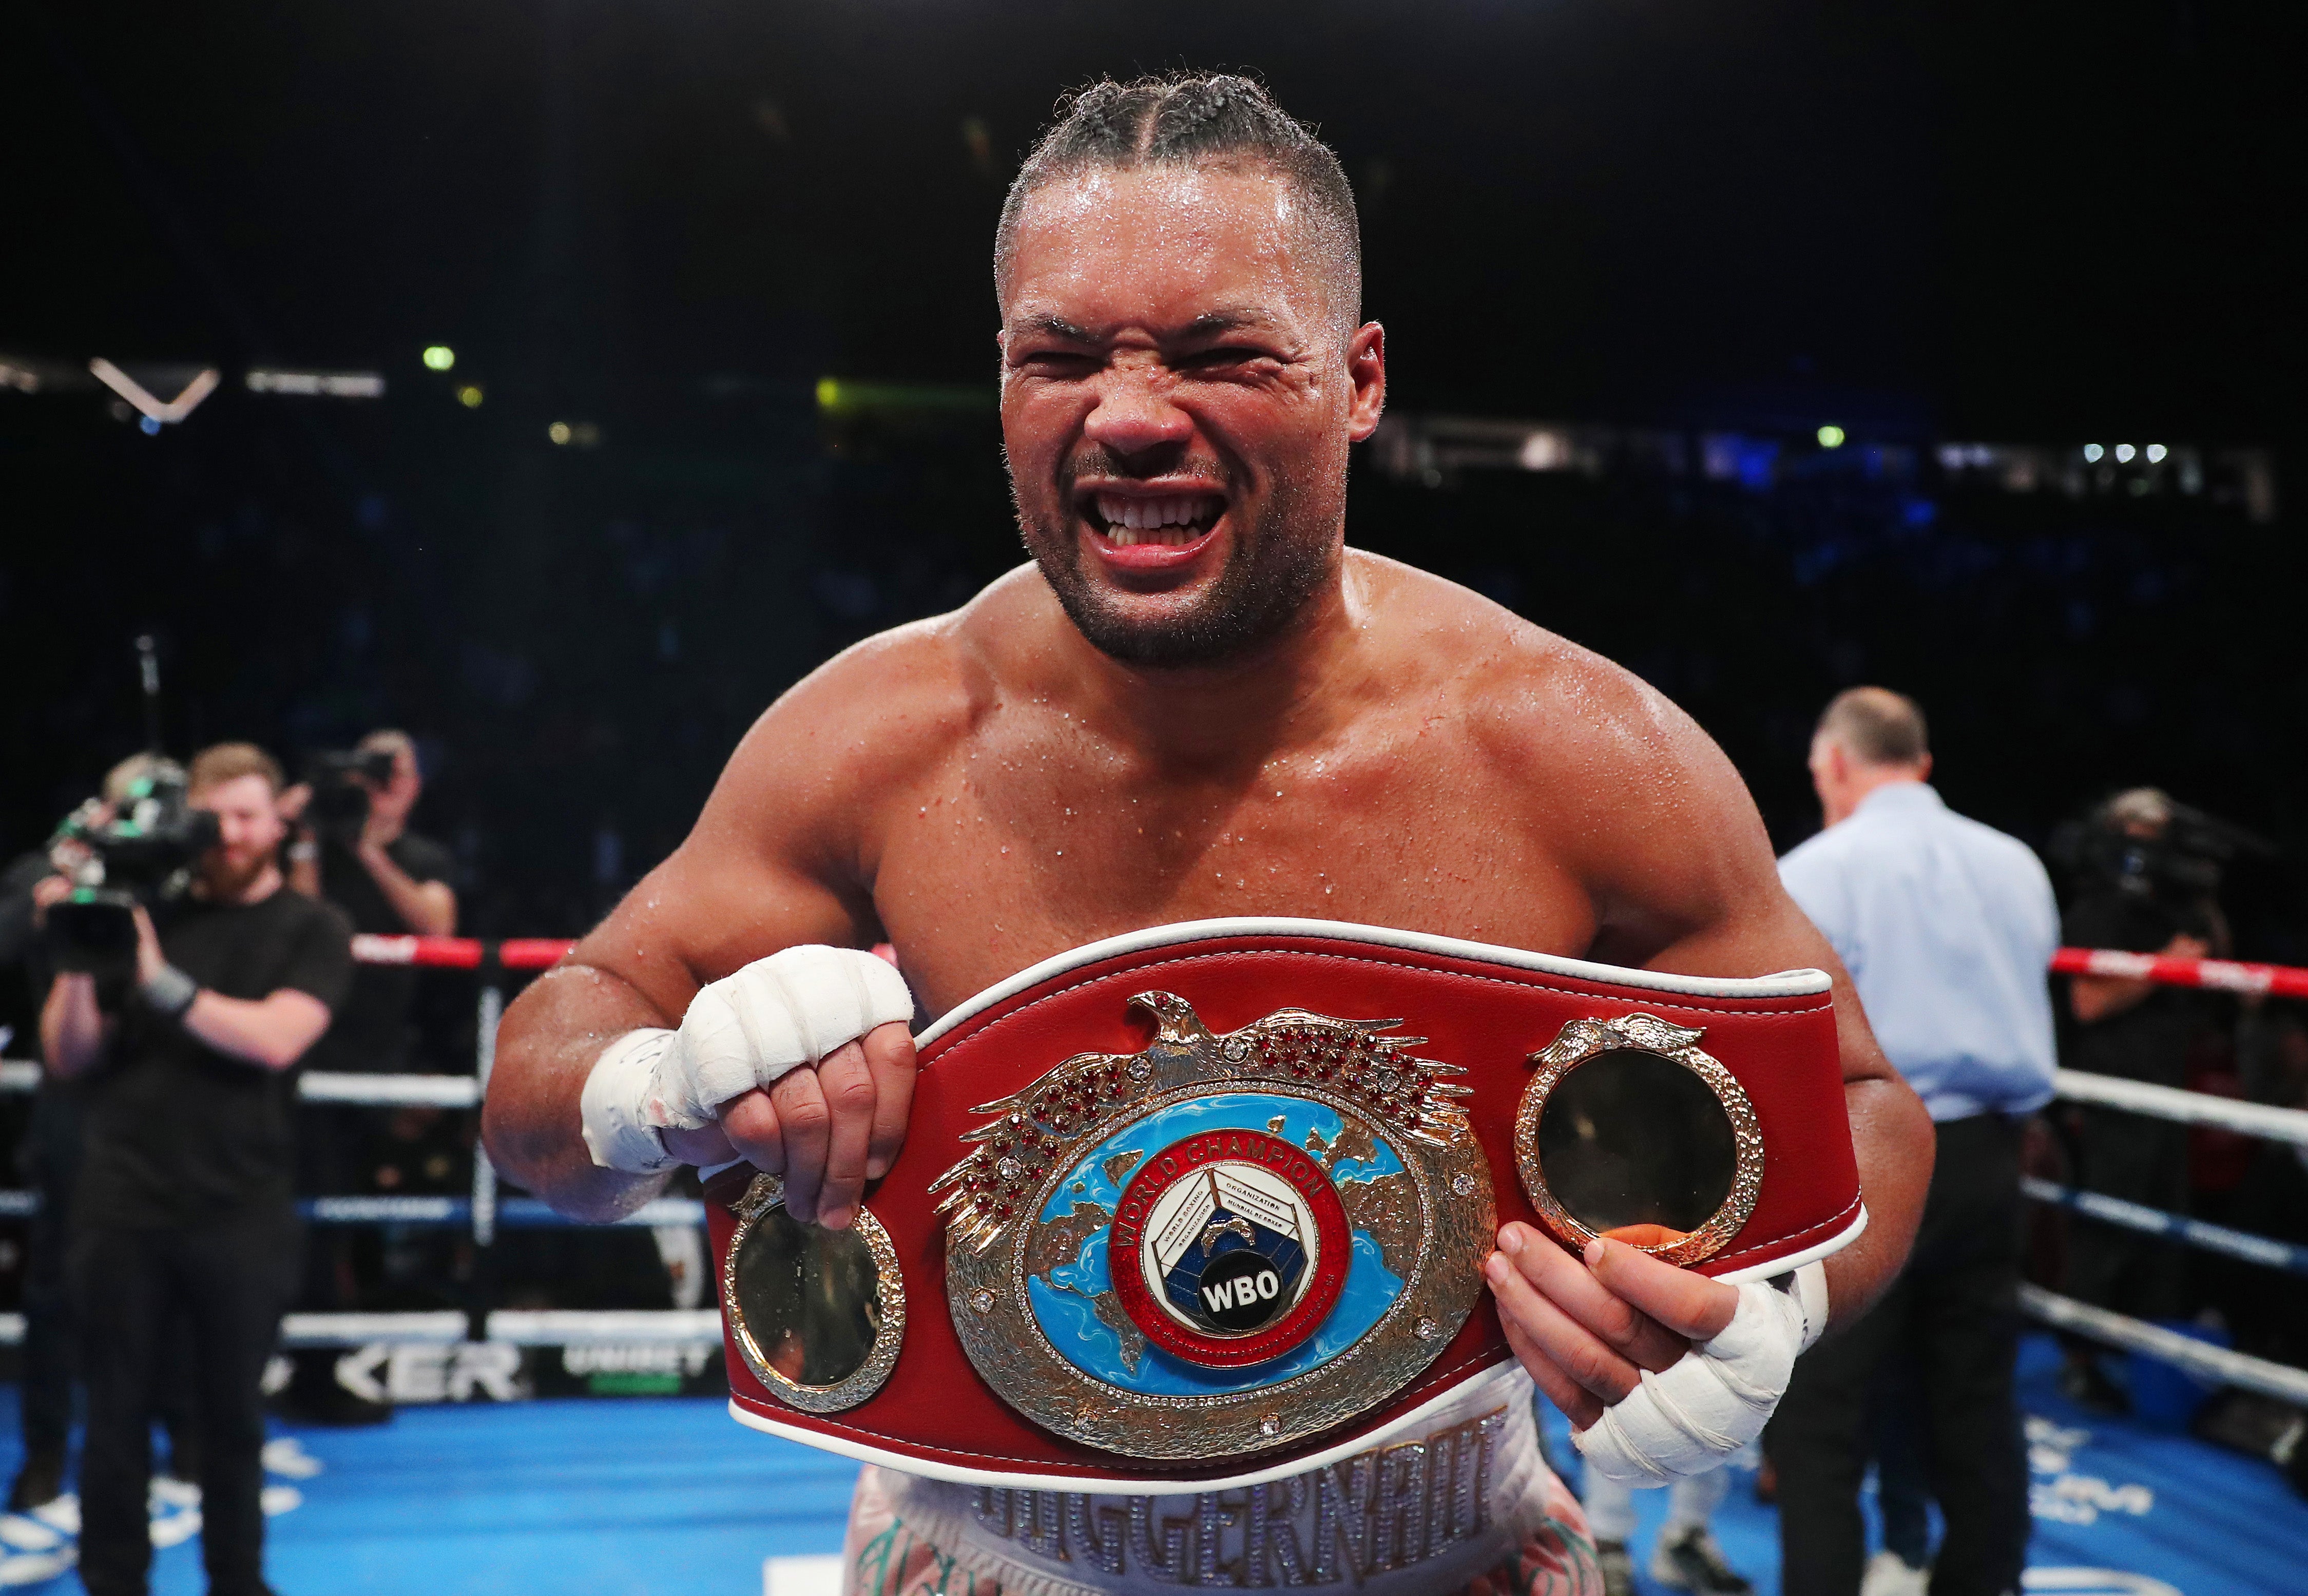 Joyce claimed the vacant interim WBO heavyweight title with the win